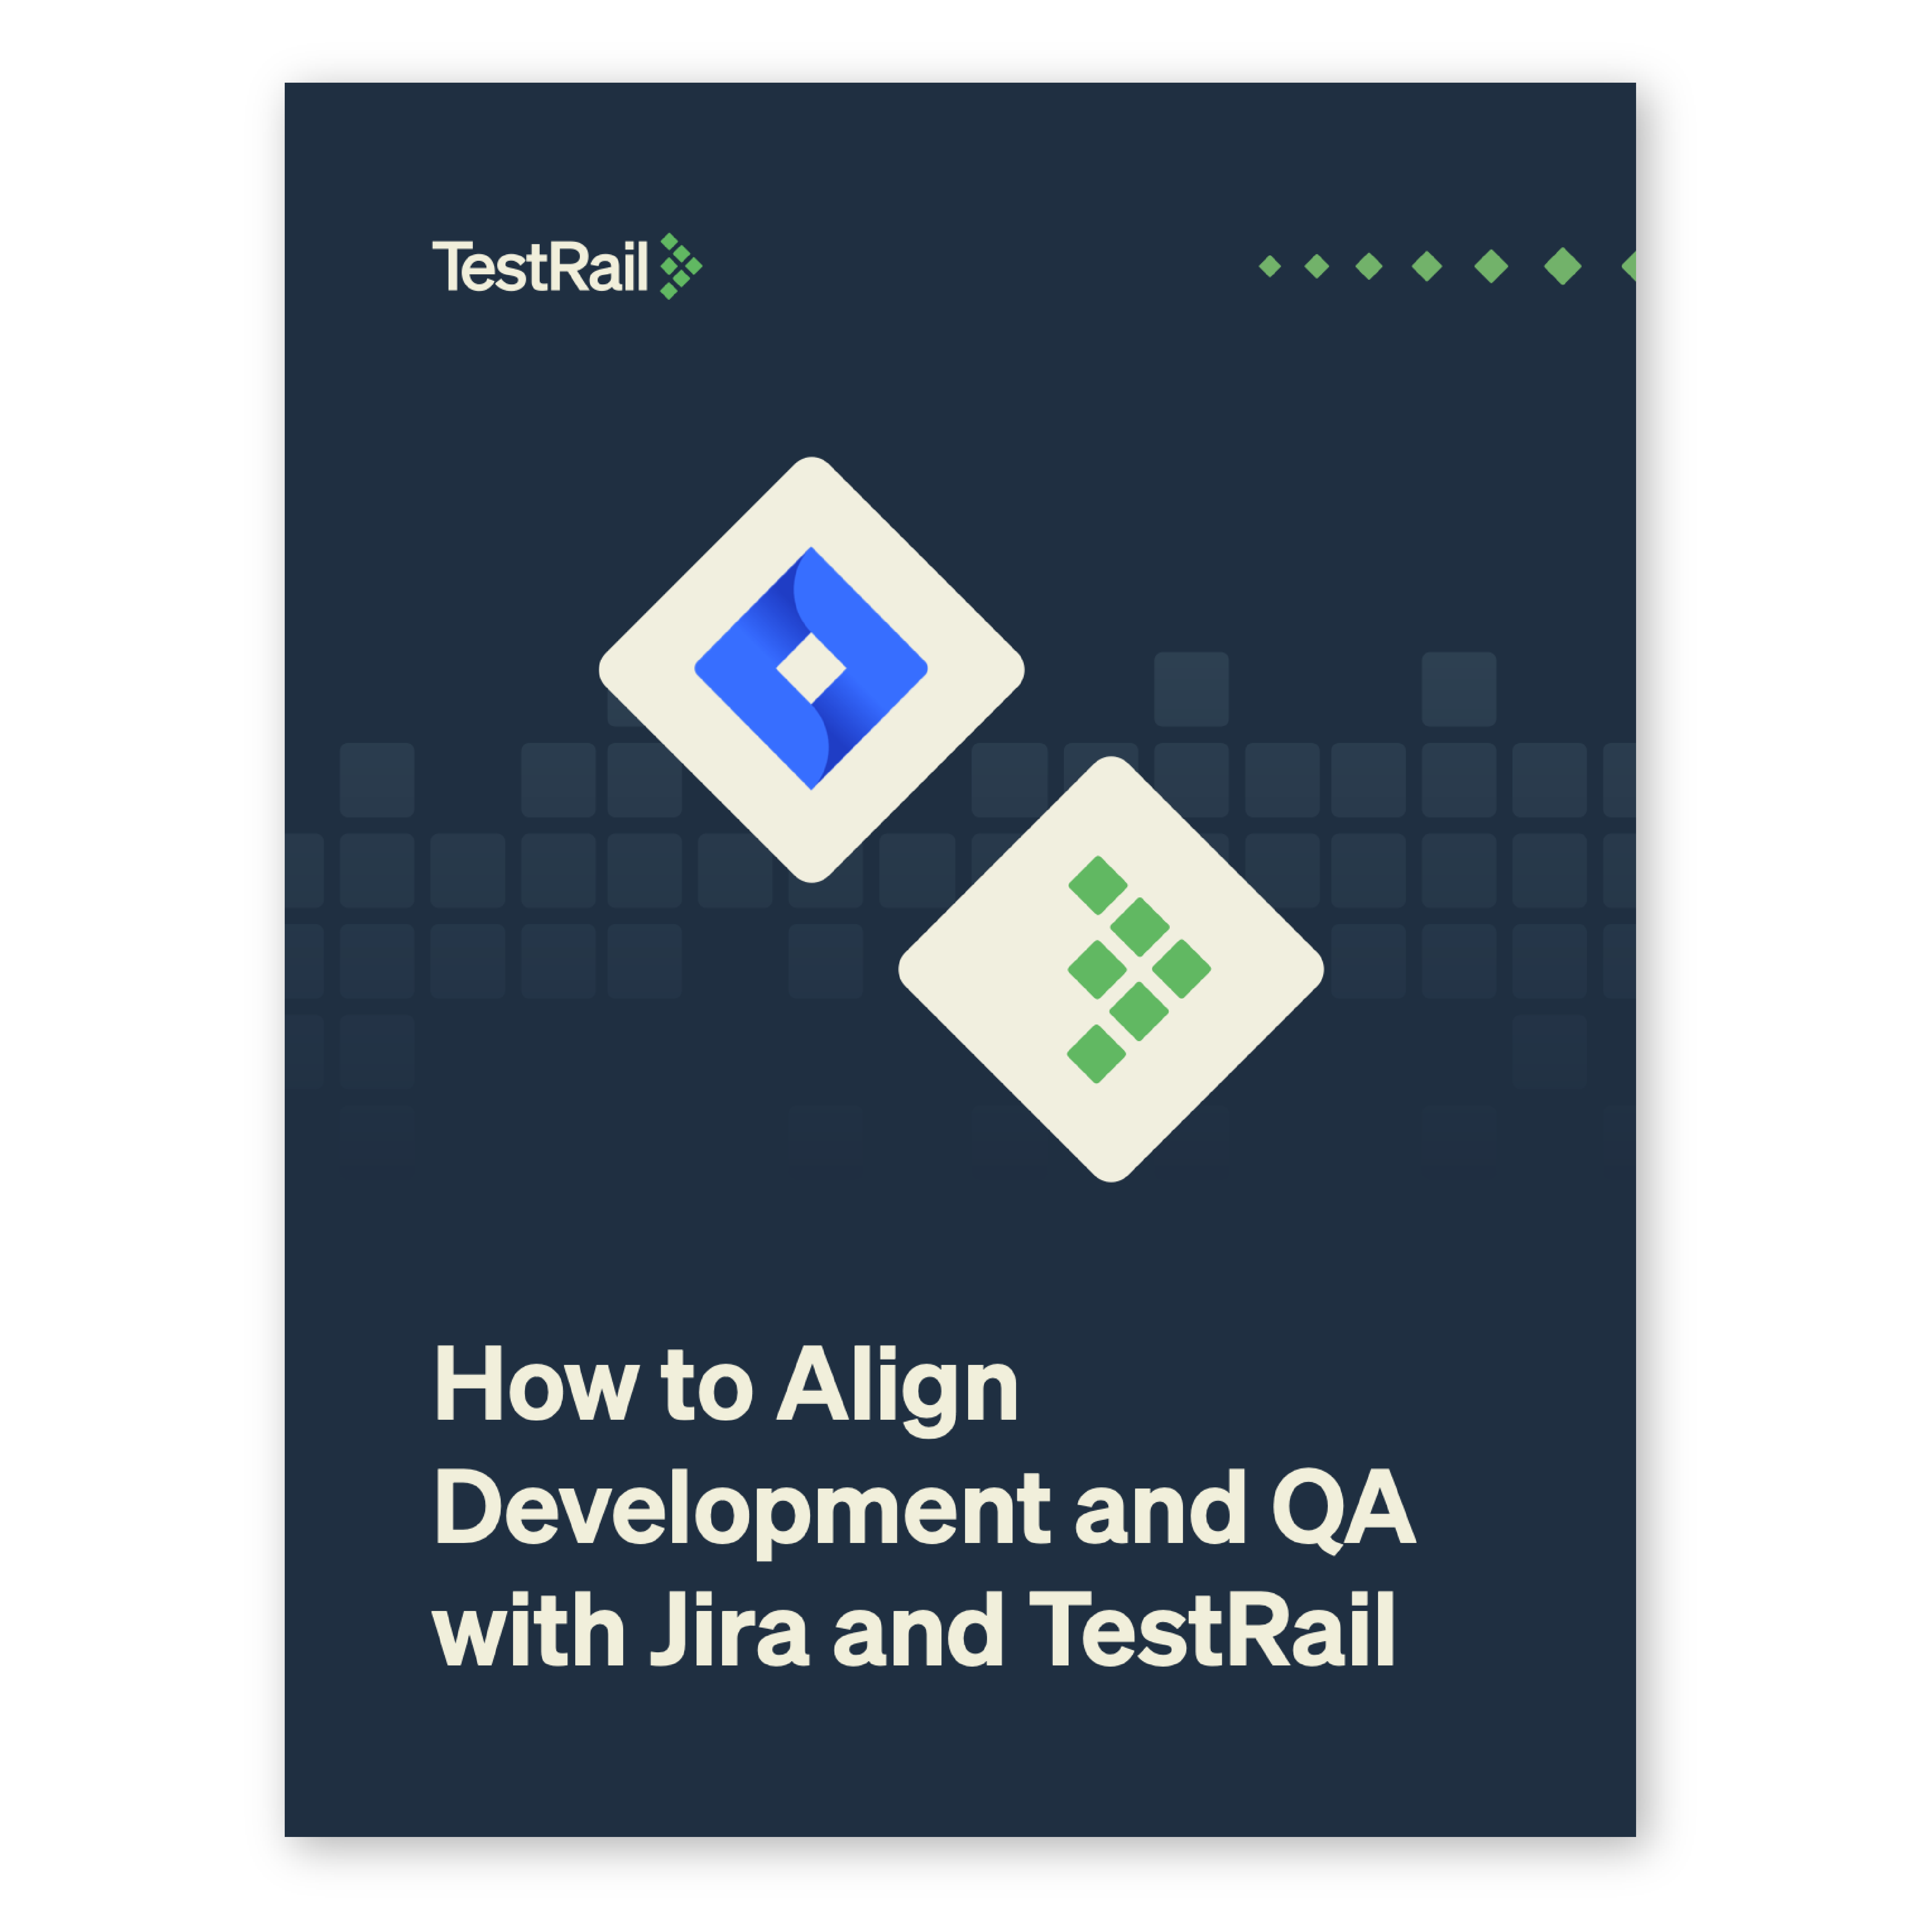 How to Align Development and QA with TestRail and Jira